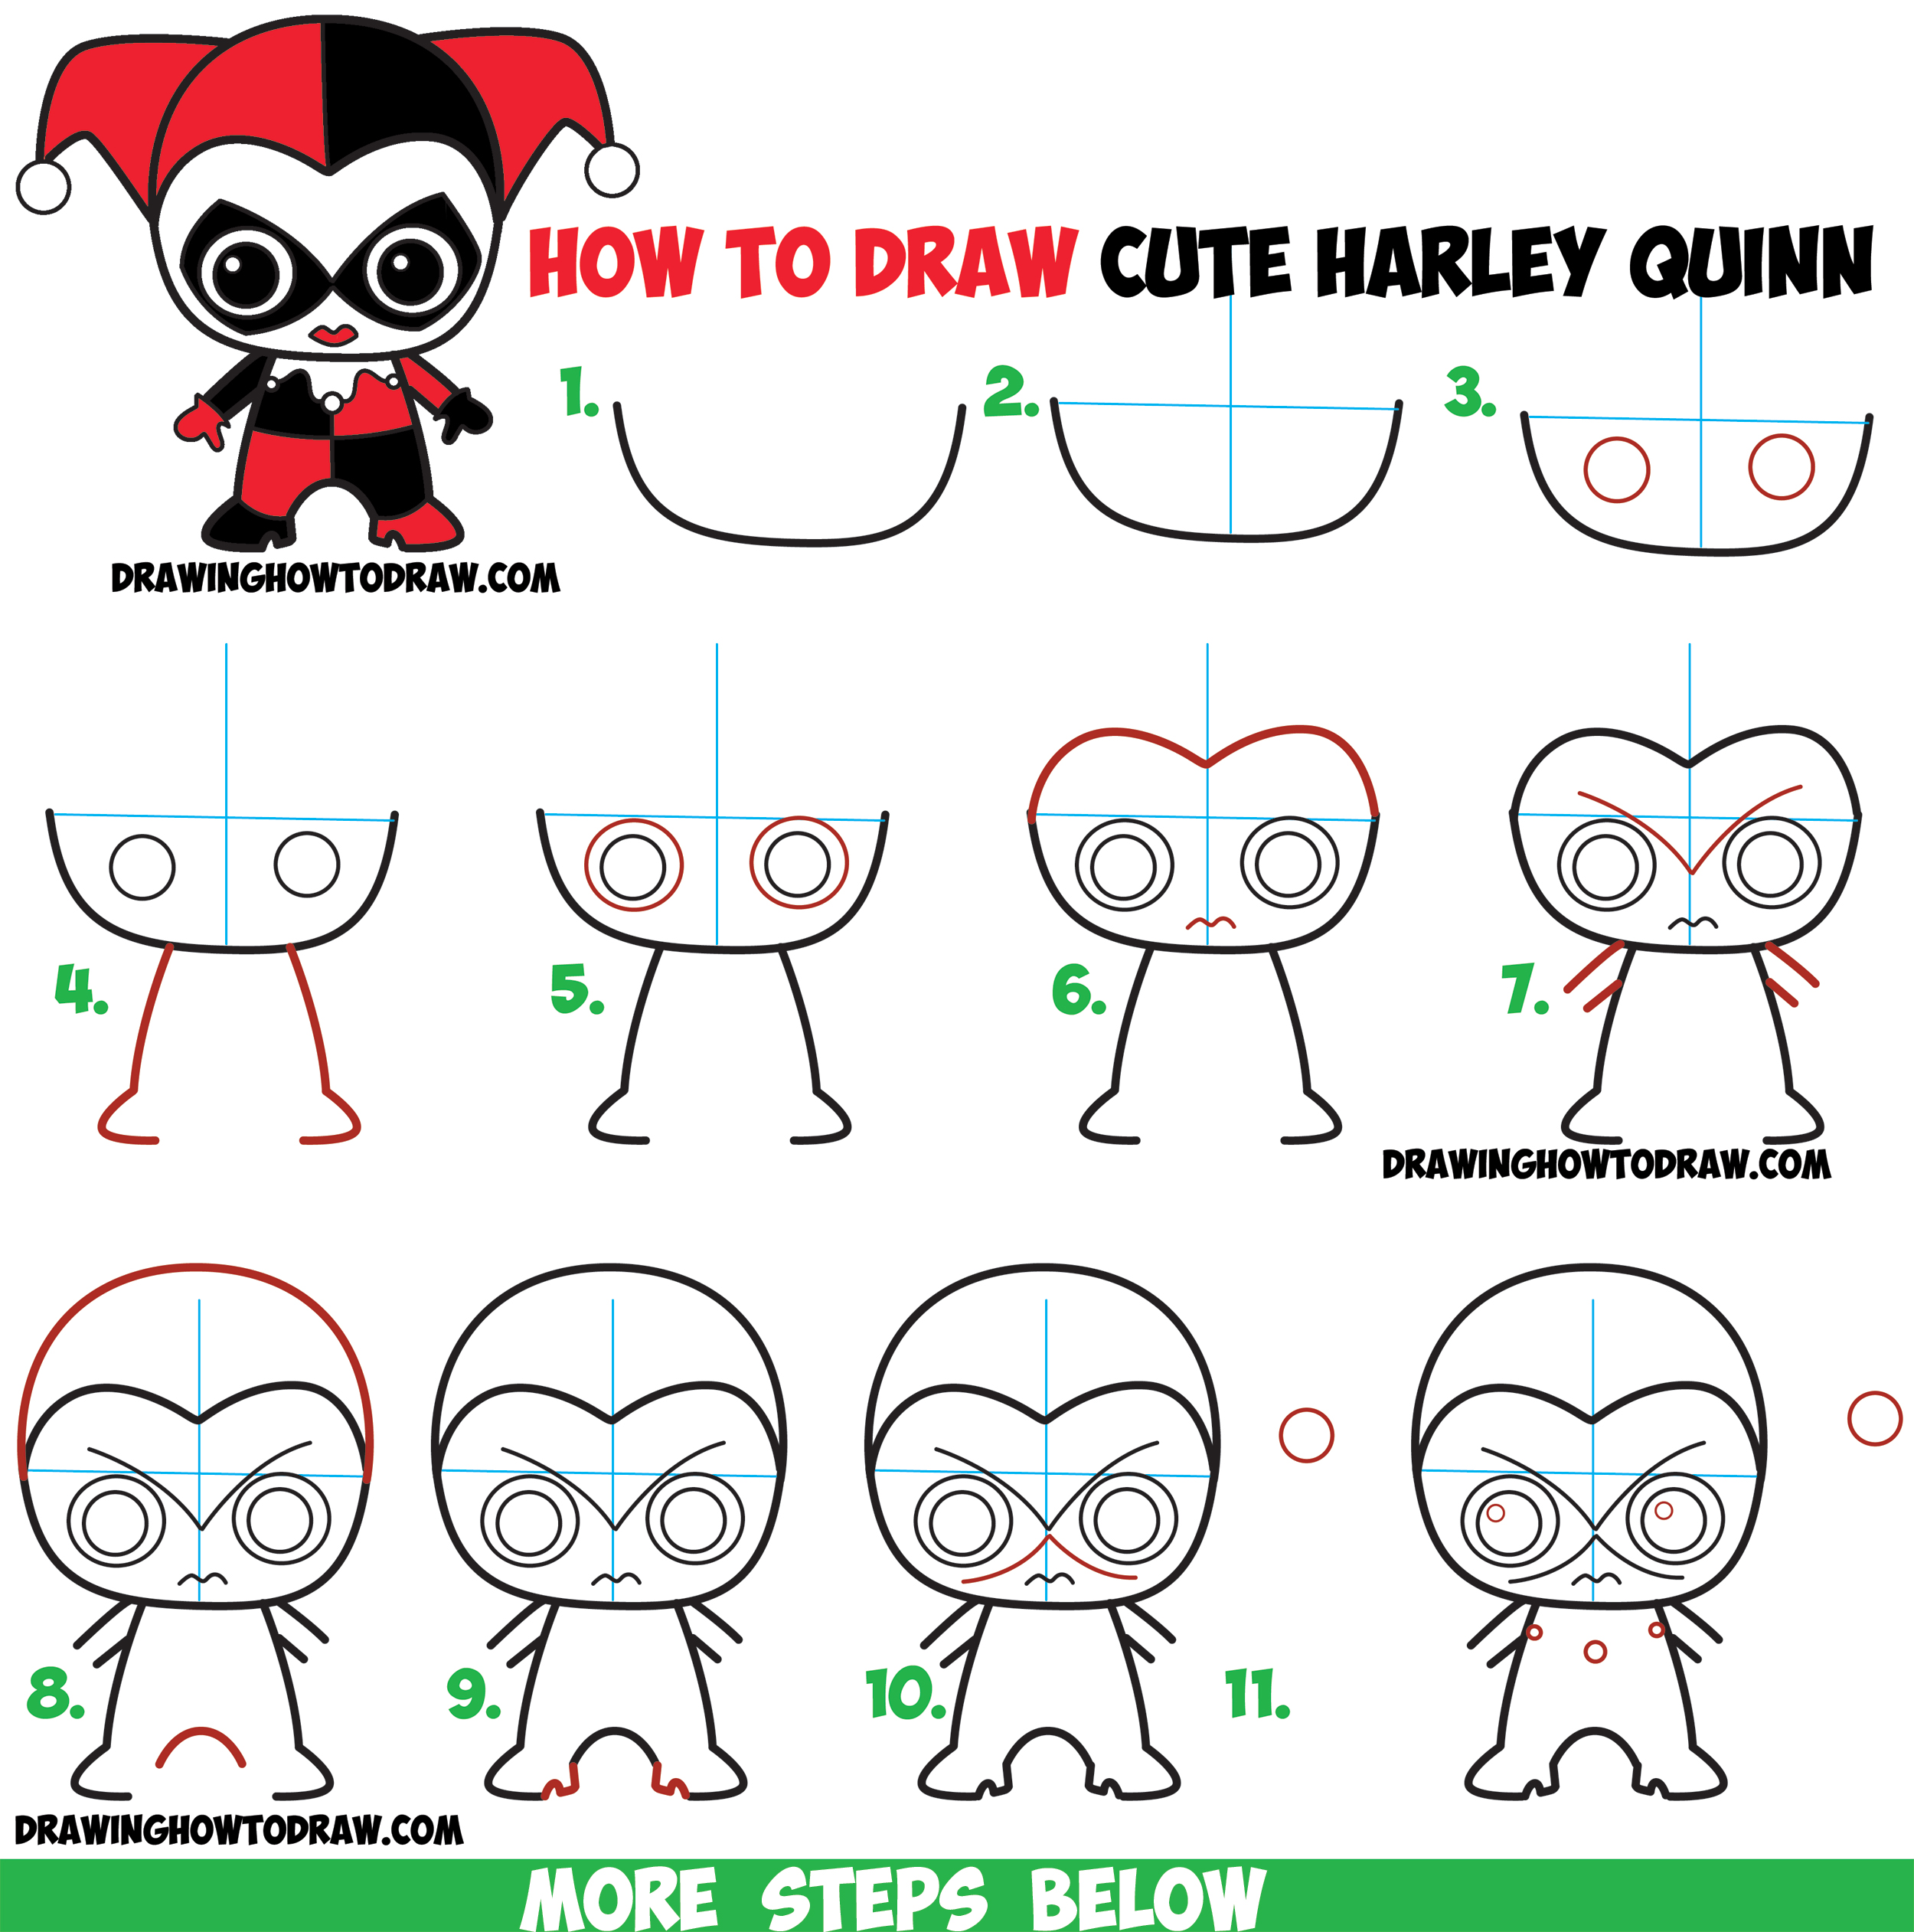 How to Draw Cute Chibi Harley Quinn from DC Comics in Easy 